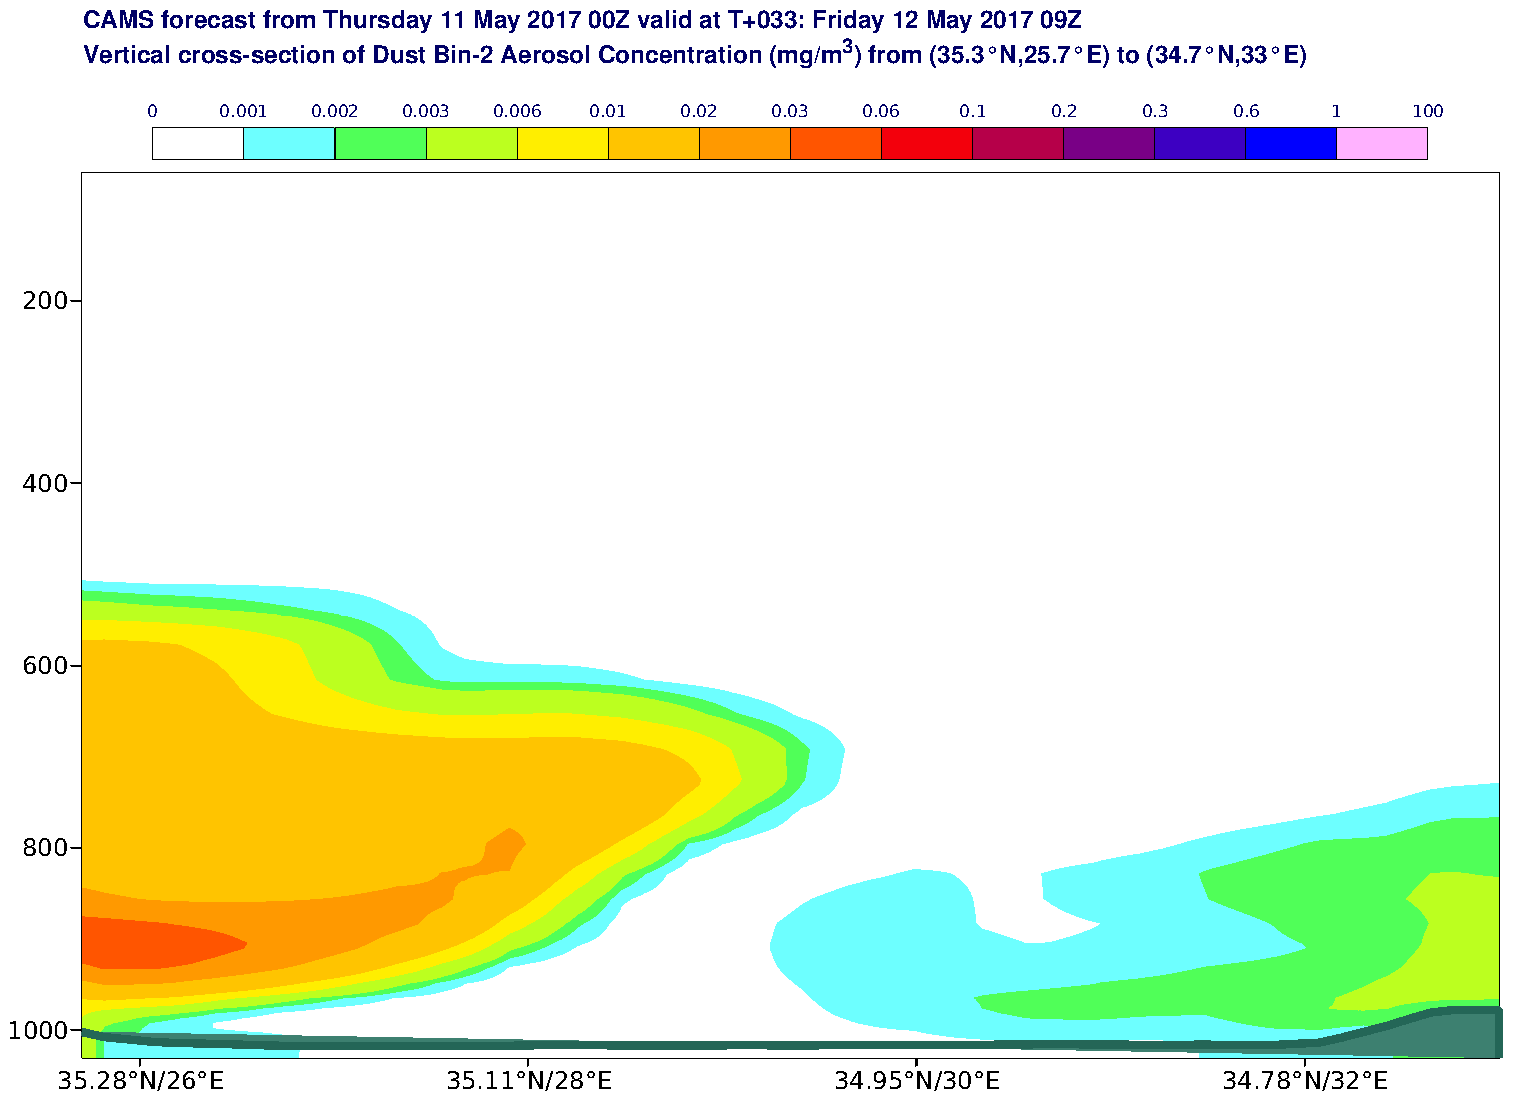 Vertical cross-section of Dust Bin-2 Aerosol Concentration (mg/m3) valid at T33 - 2017-05-12 09:00